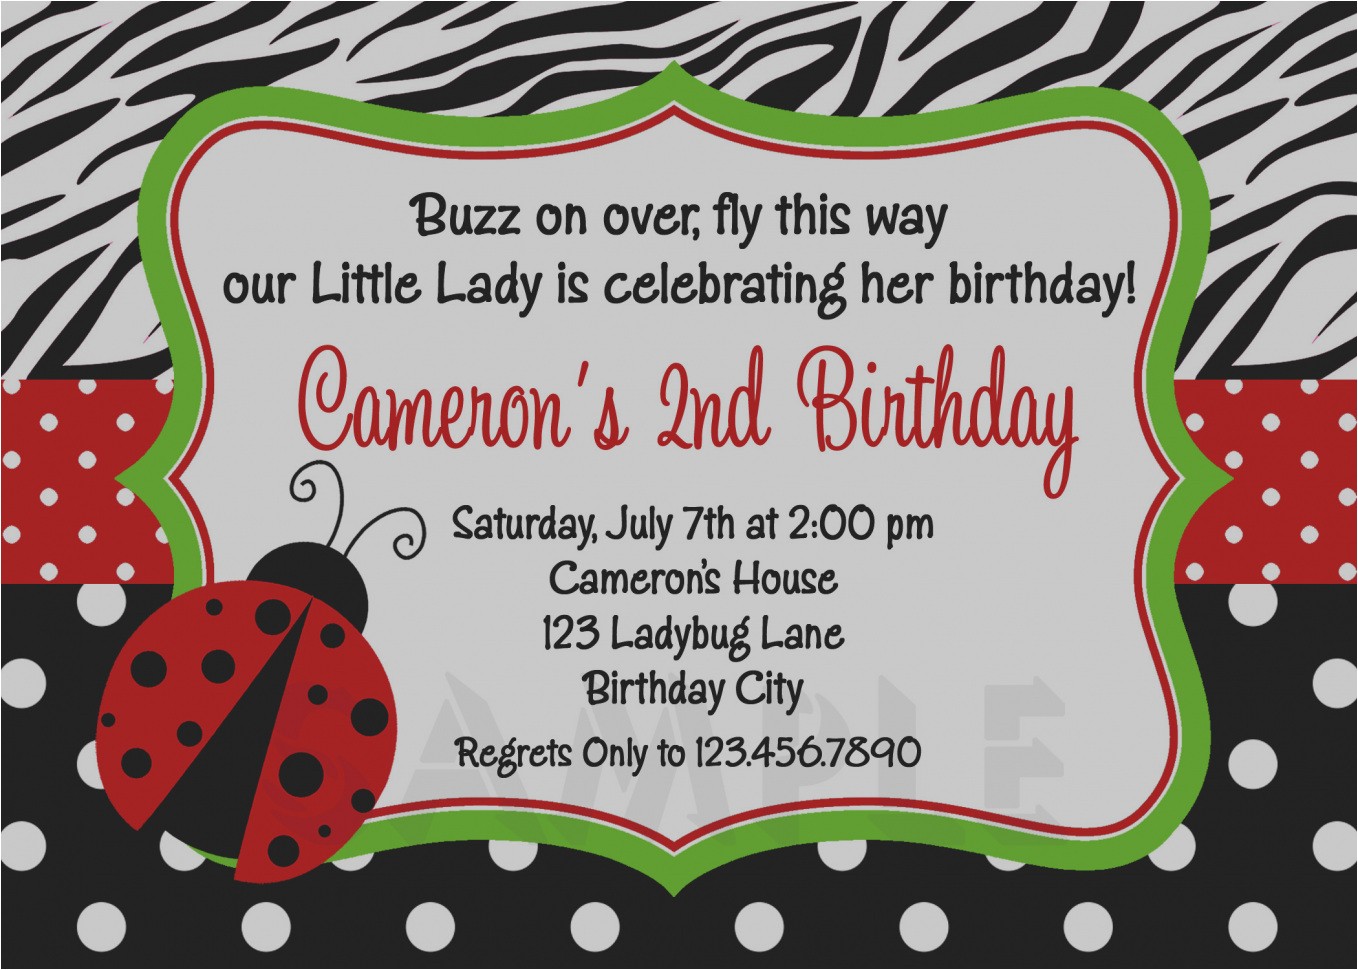 Cheap Ladybug Baby Shower Invitations Cheap Invitations Birthday Image Collections Baby